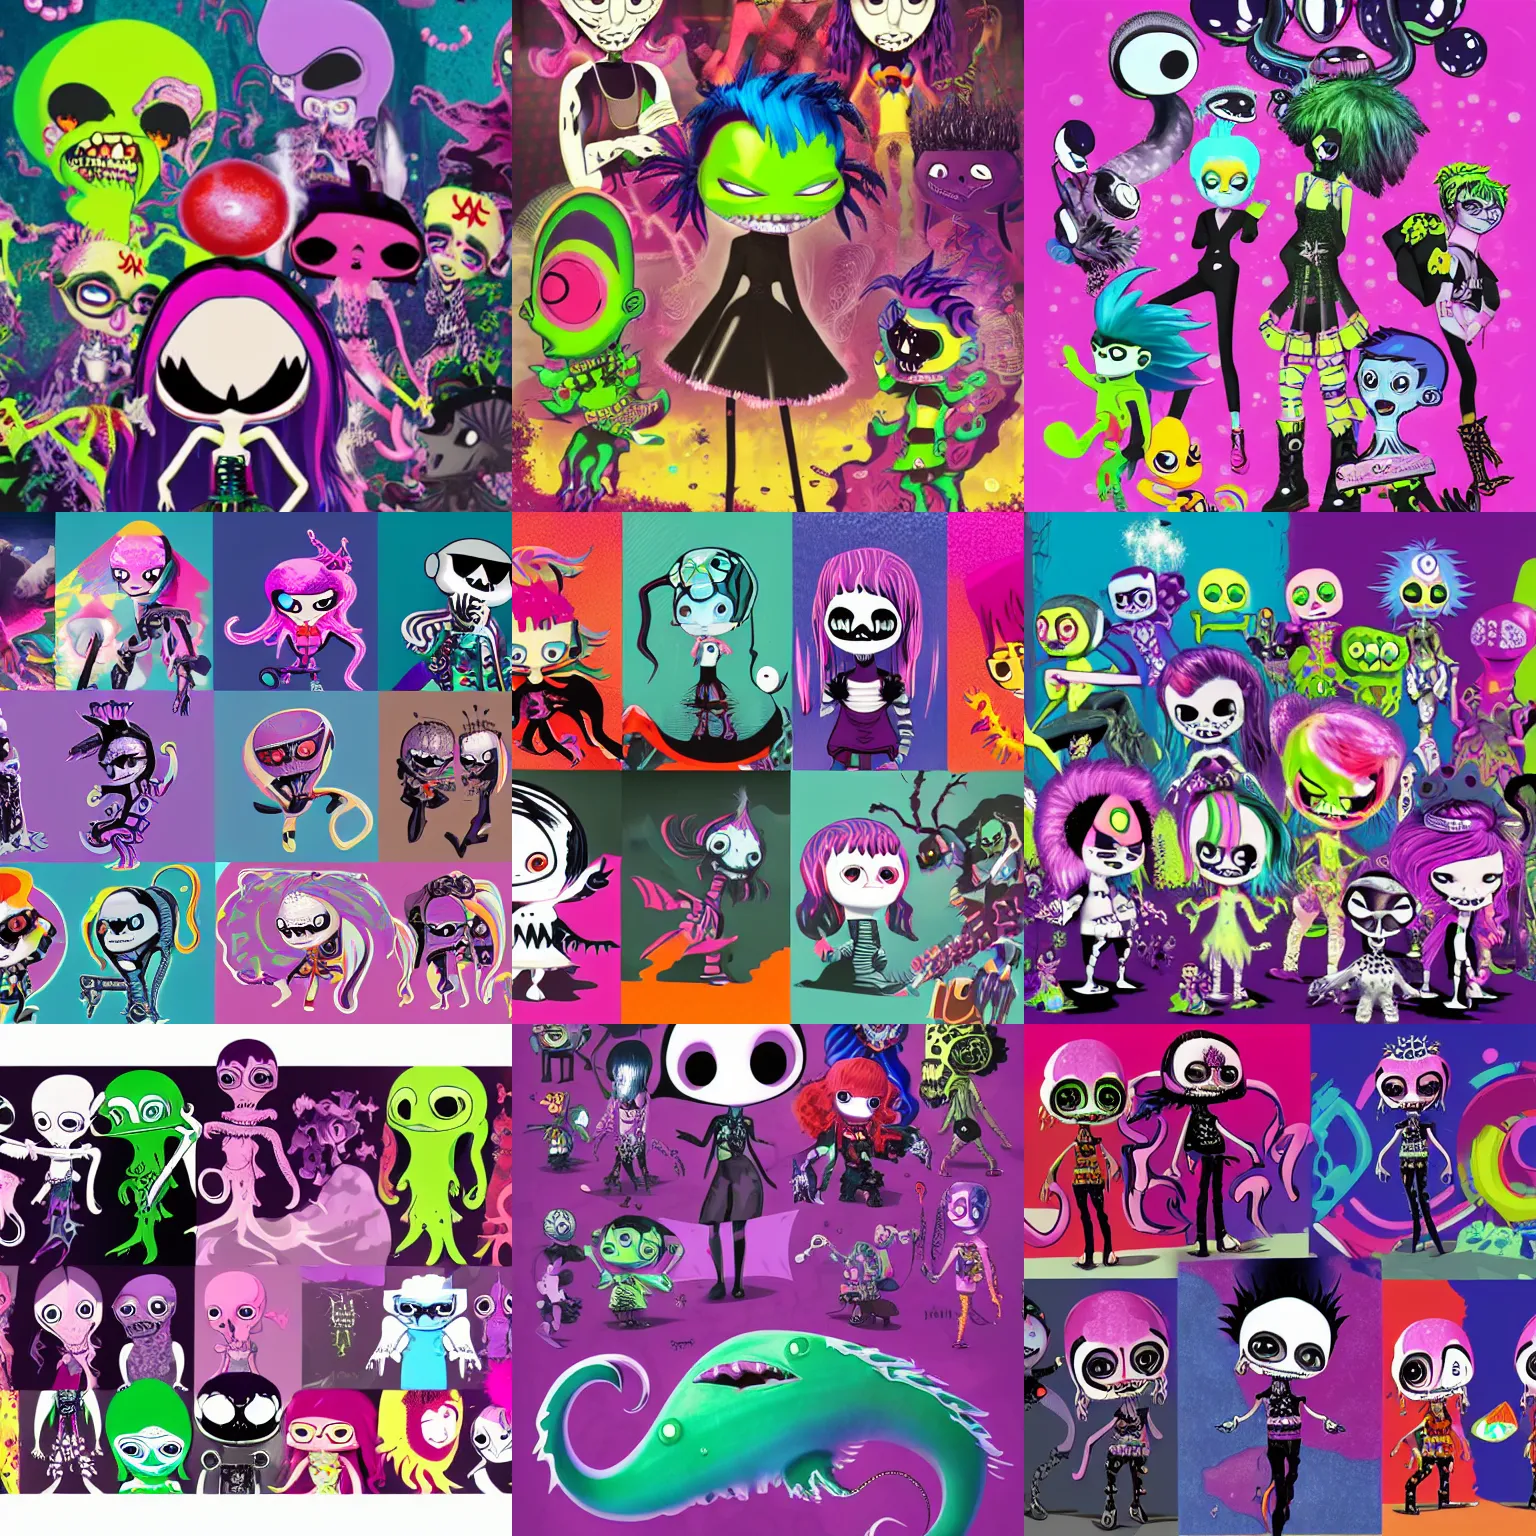 Prompt: CGI lisa frank gothic punk vampiric rockstar underwater vampiric anthropomorphic squid character designs of various shapes and sizes by genndy tartakovsky and ruby gloom by martin hsu and the creators of fret nice being overseen by Jamie Hewlett from gorillaz and tim shafer from doublefine for a splatoon game by nintendo